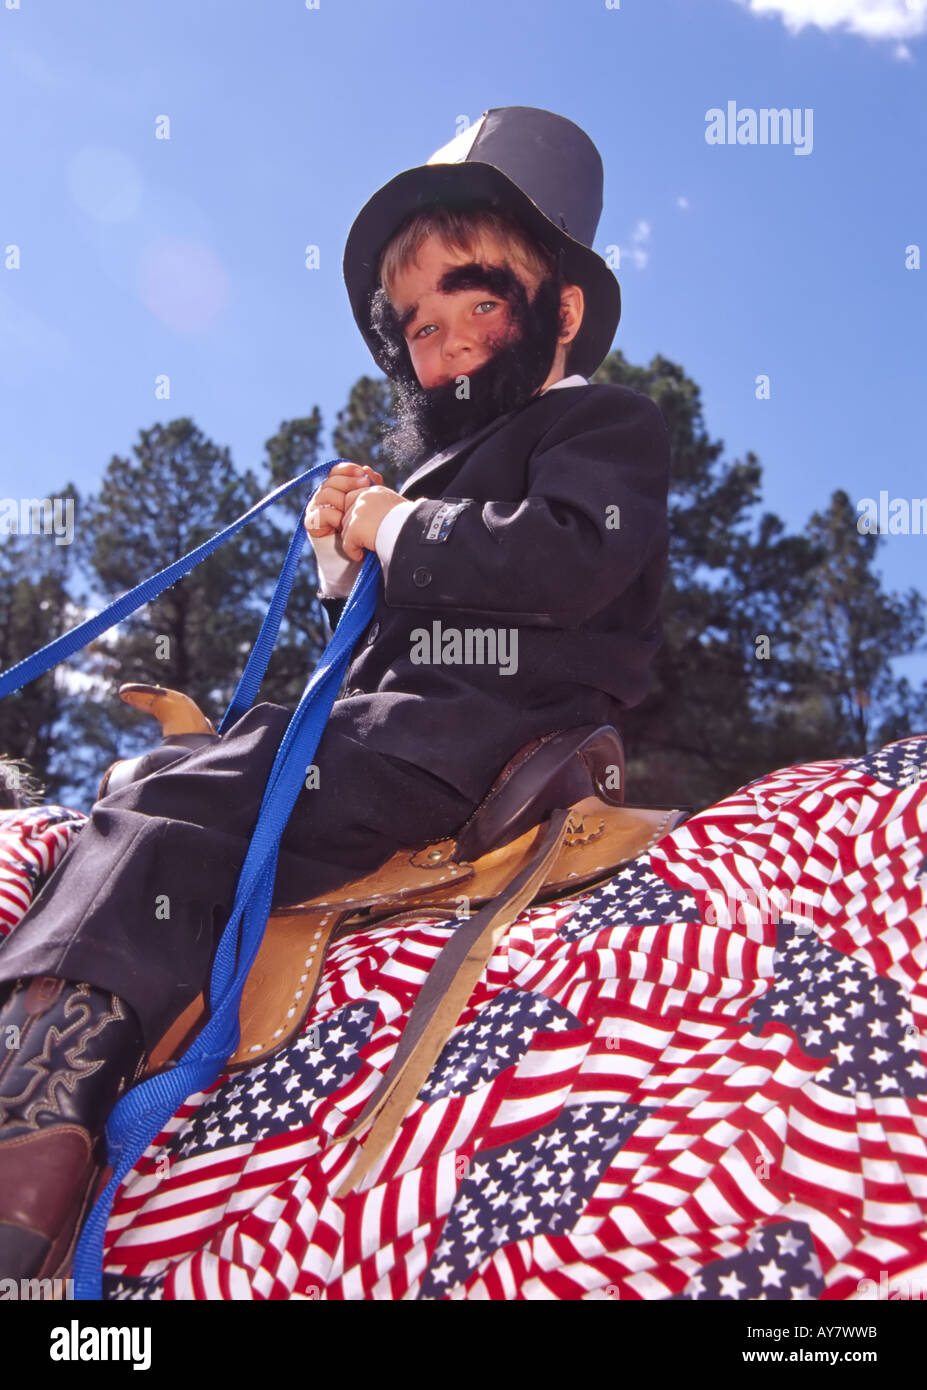 A young boy portraying Abe Lincoln rides with pride in the Aspenfest Parade, in downtown Ruidoso, New  Mexico. Stock Photo